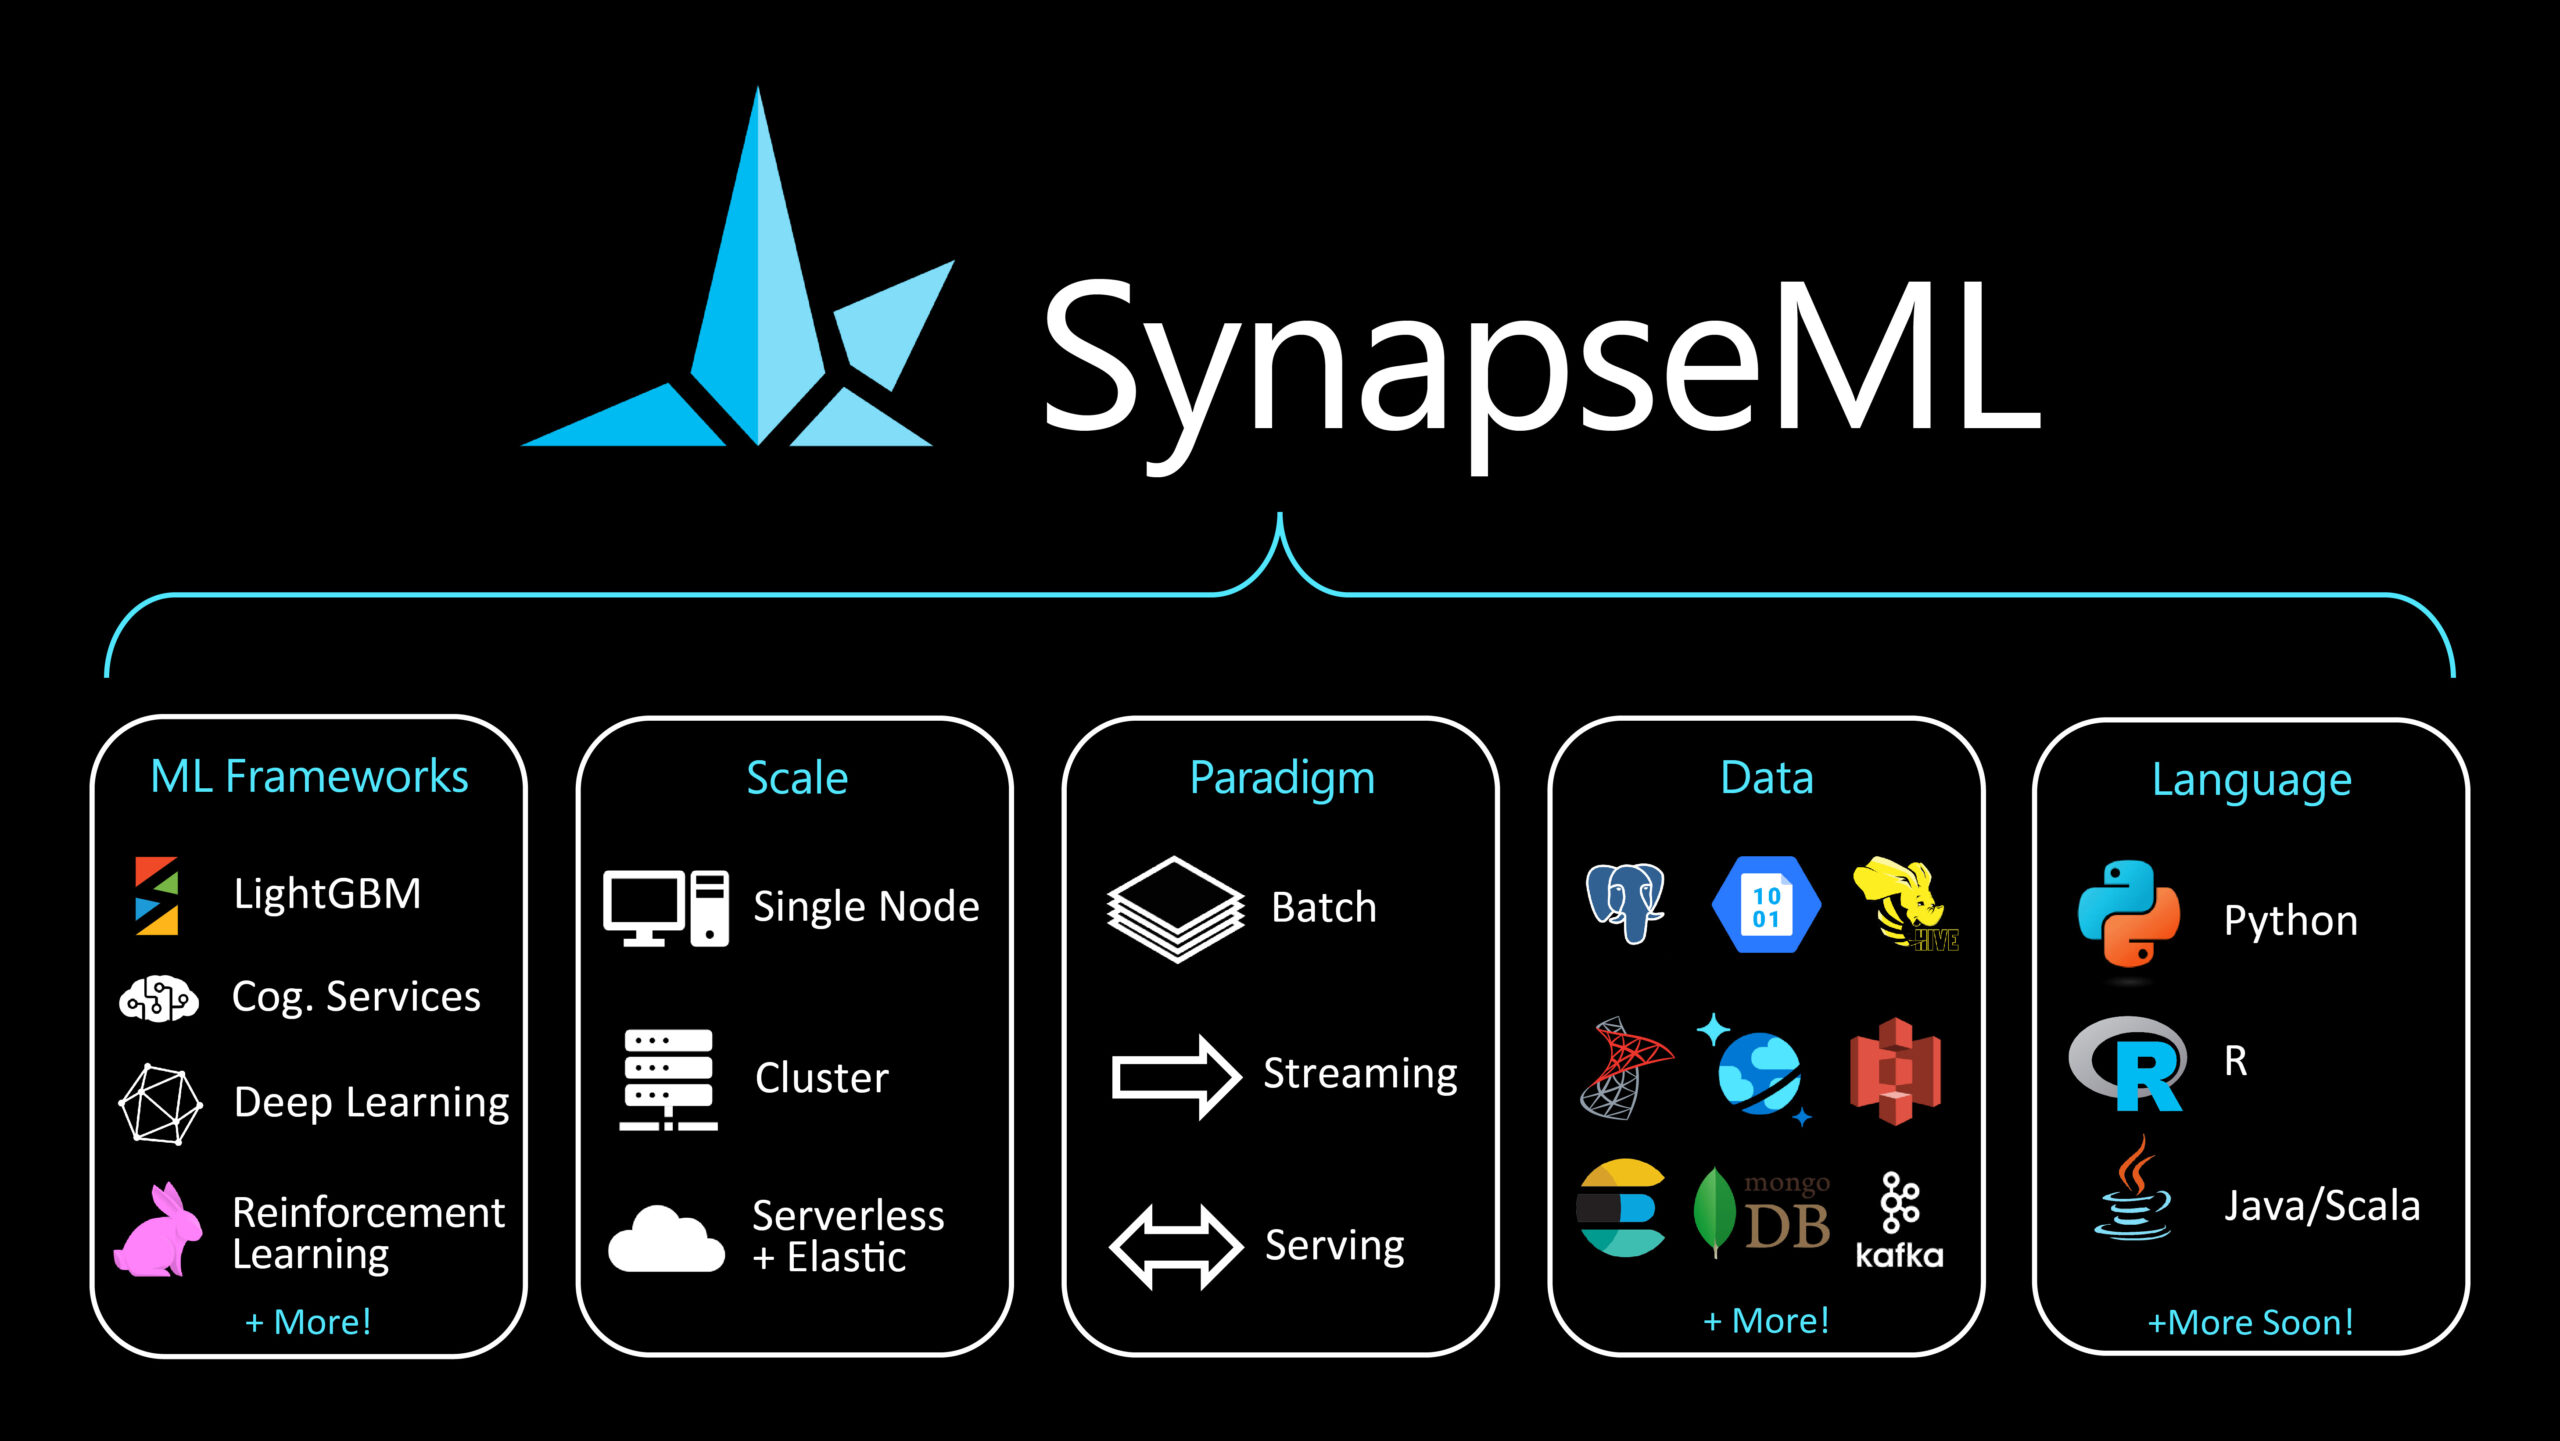 A graphic illustrating that SynapseML unifies a variety of different ML frameworks (including LightGBM, Azure Cognitive Services, Deep Learning, reinforcement learning), scales (including single node, cluster, and serverless + elastic), paradigms (including batch, streaming, and serving), cloud data stores, and languages.